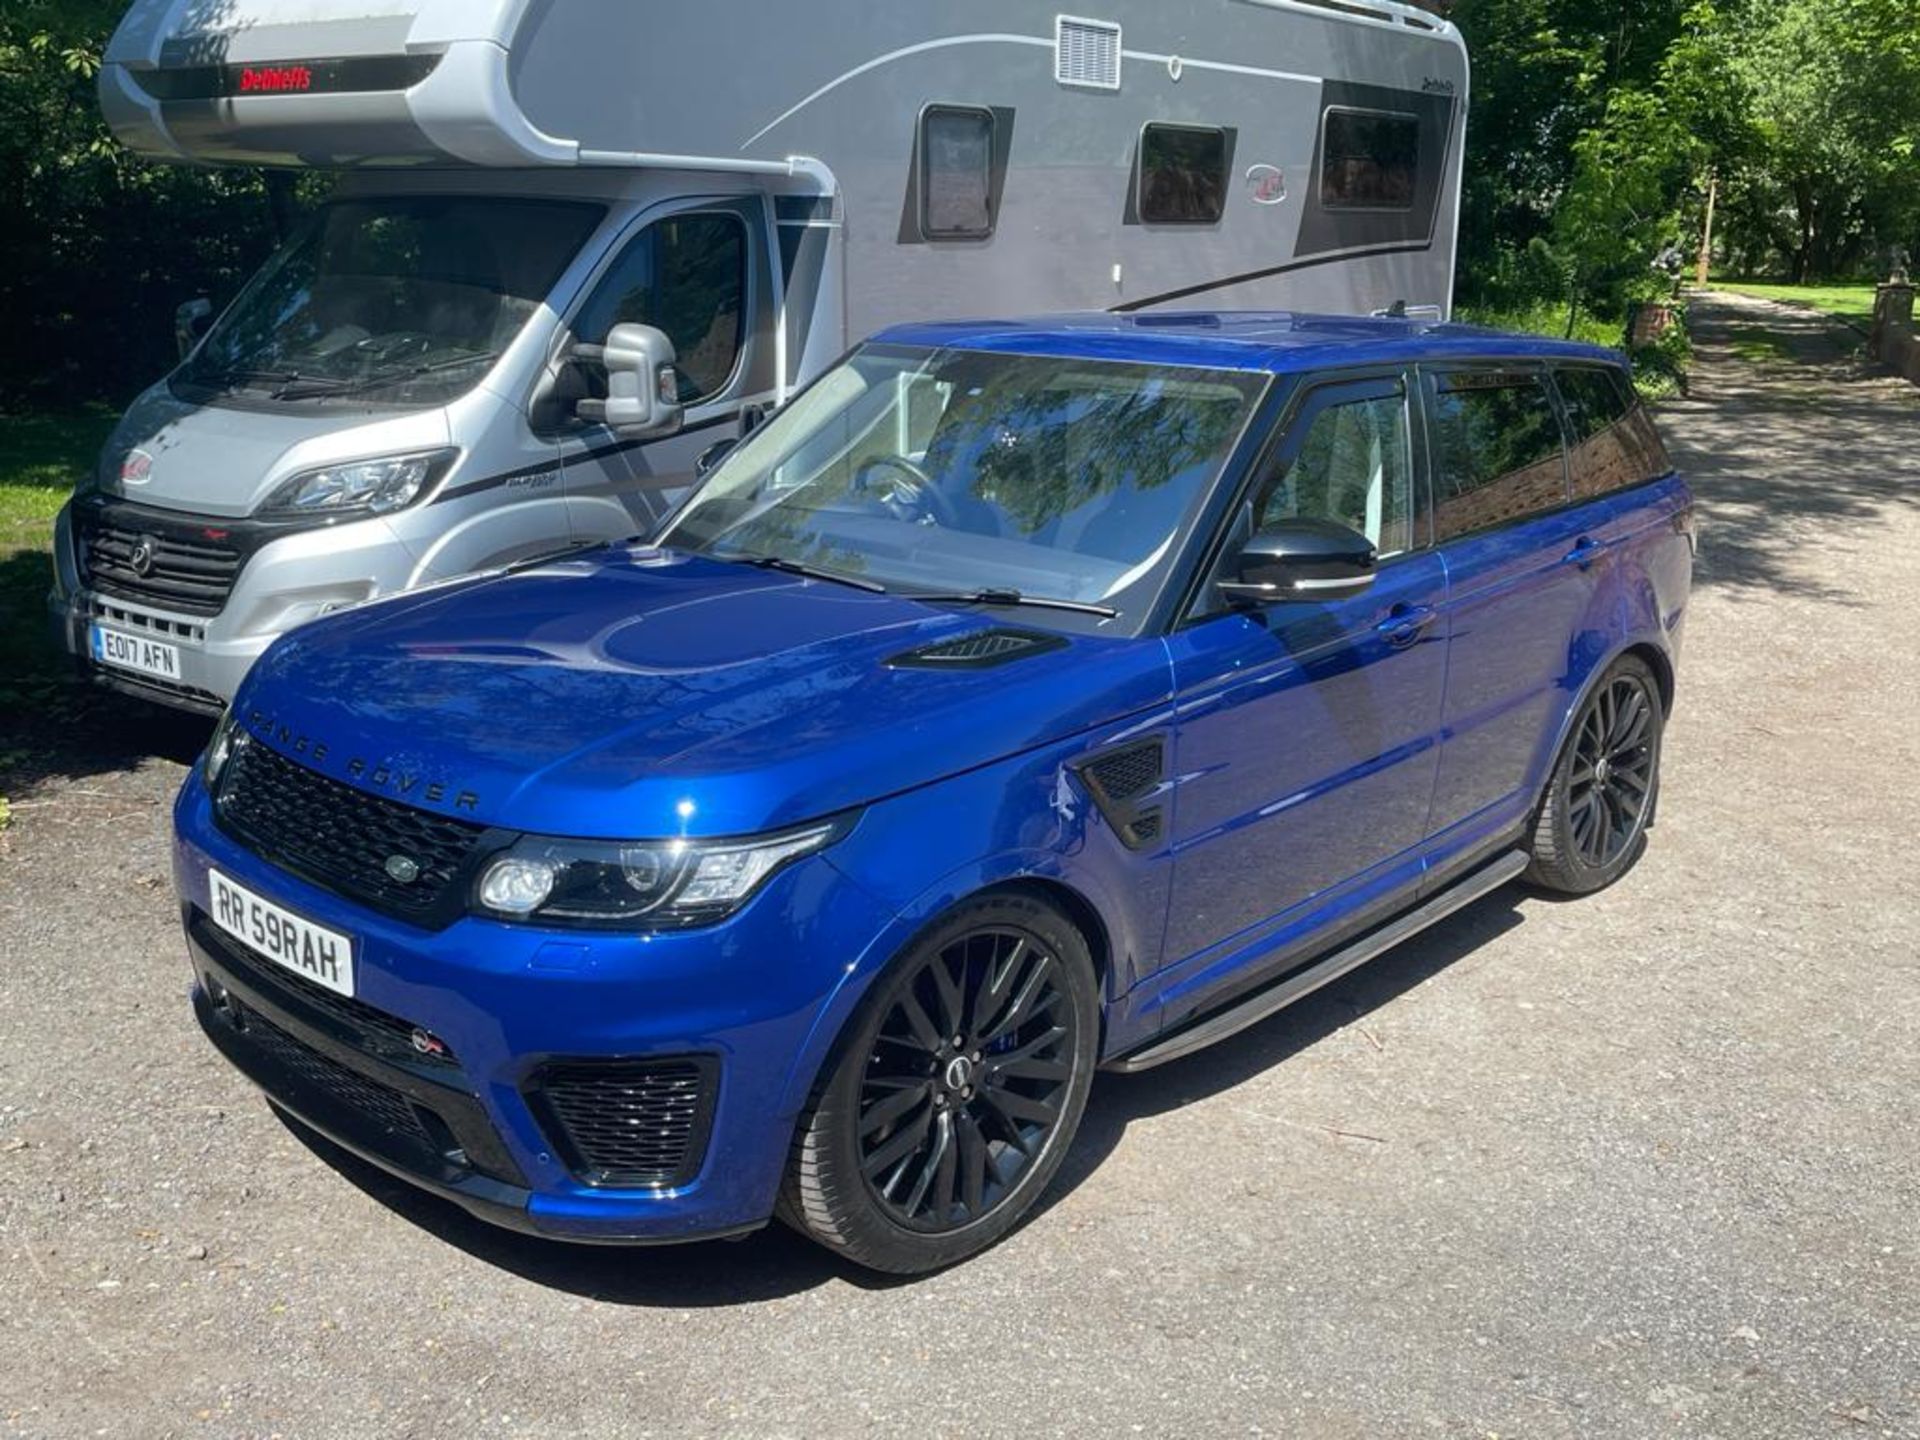 2016 RANGE ROVER SPORT SVR AUTOBIOGRAPHY DYNAMIC V8 SUPERCHARGED AUTOMATIC 5.0 550PS PETROL ENGINE - Image 11 of 28